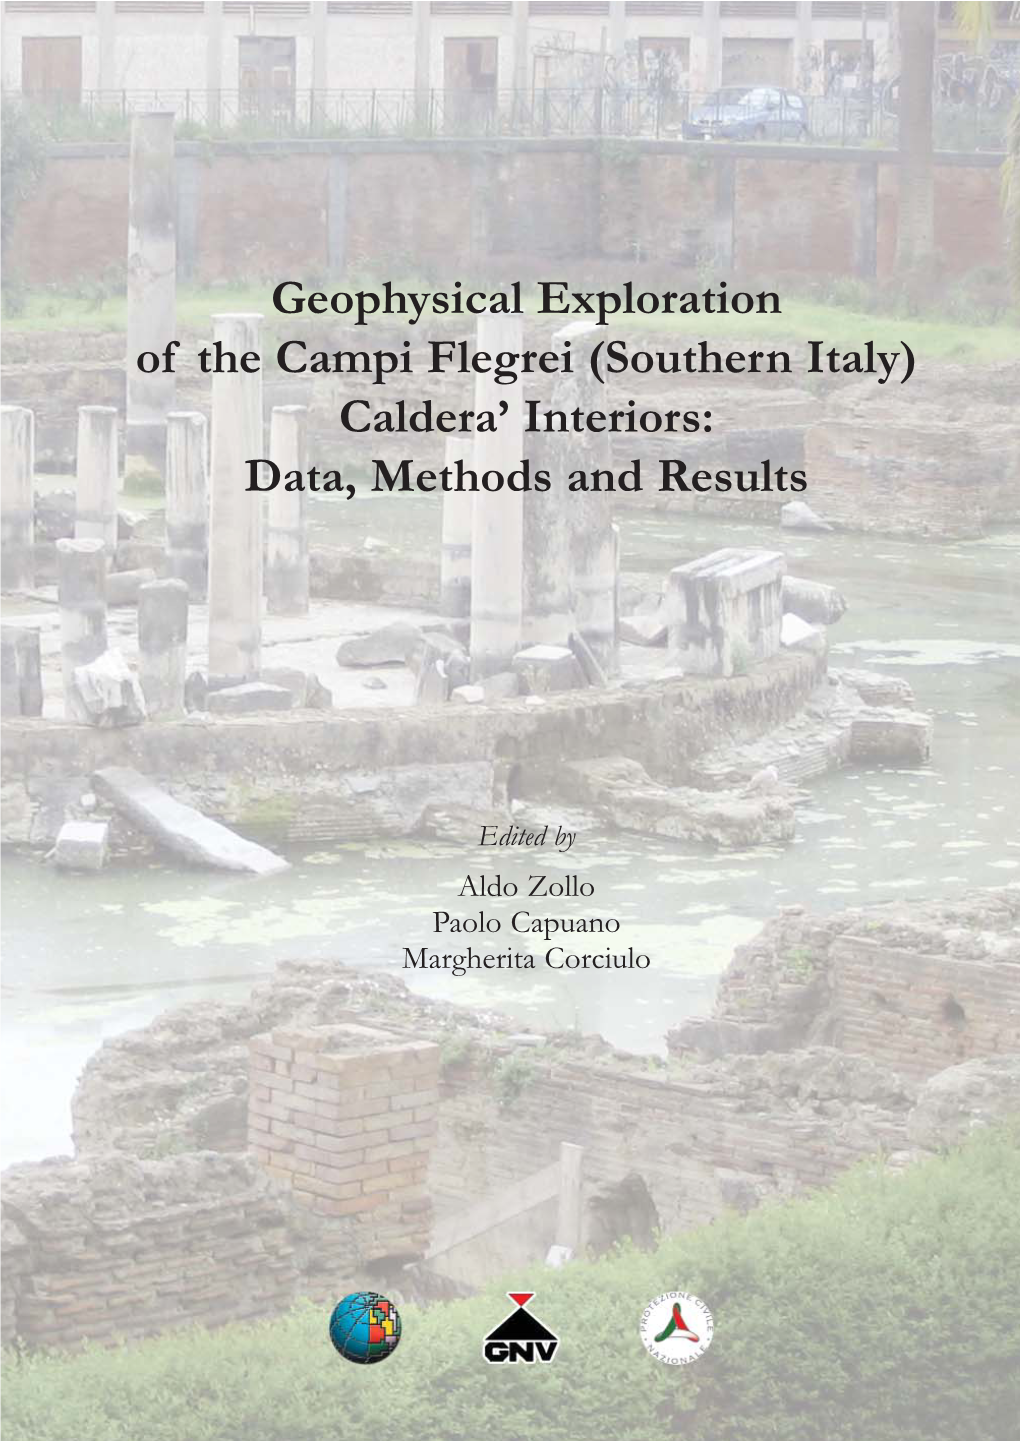 Geophysical Exploration of the Campi Flegrei (Southern Italy) Caldera’ Interiors: Data, Methods and Results